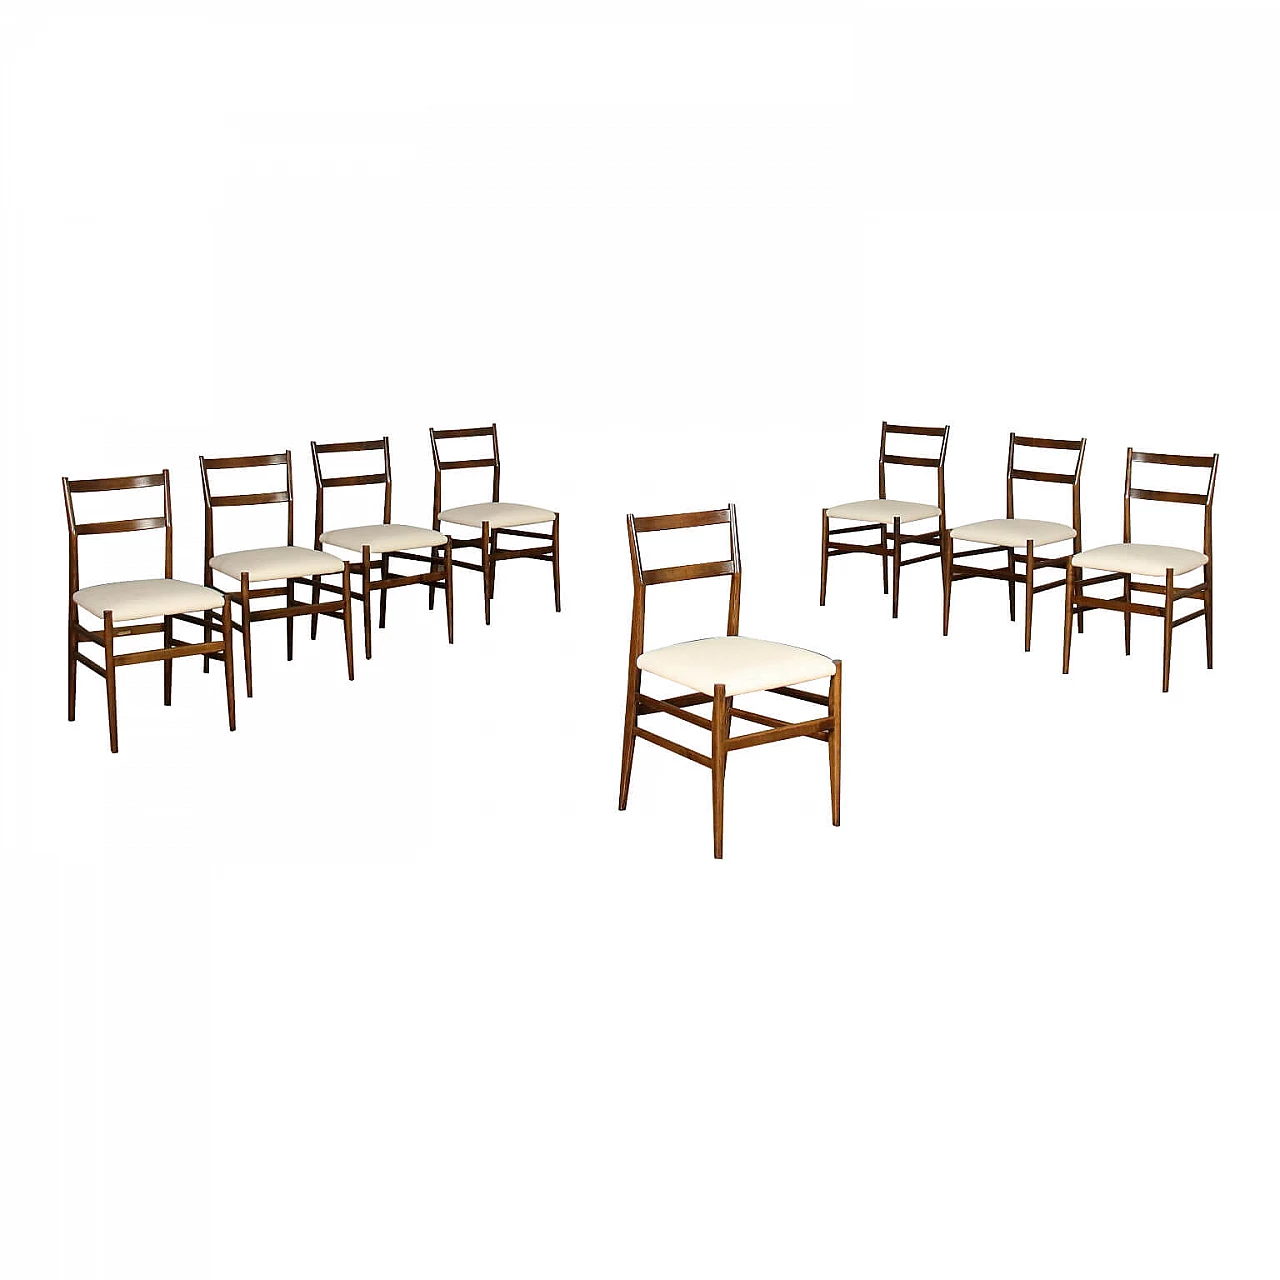 8 Leggera chairs in ash wood and leatherette by Gio Ponti for Cassina, 50s 1248851